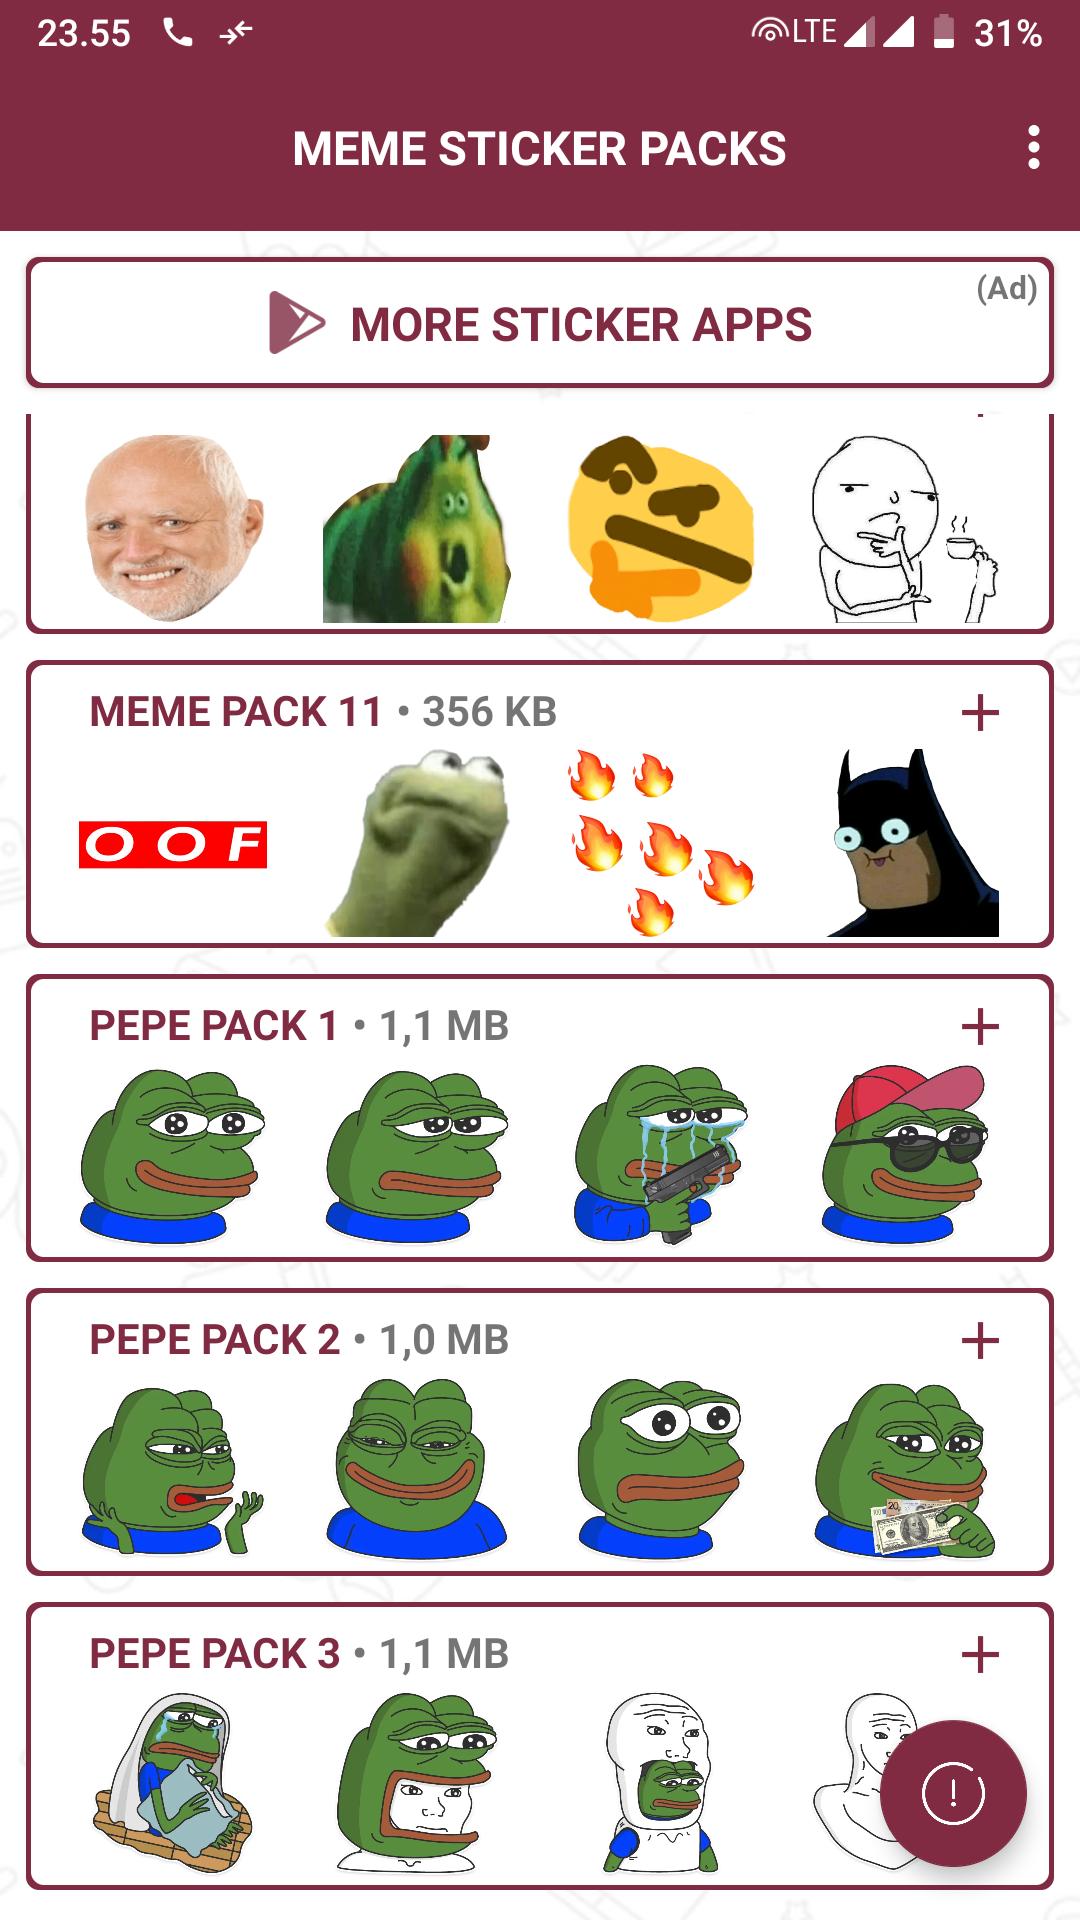 Ricardo Milos Meme Stickers Wastickerapps For Android Apk Download